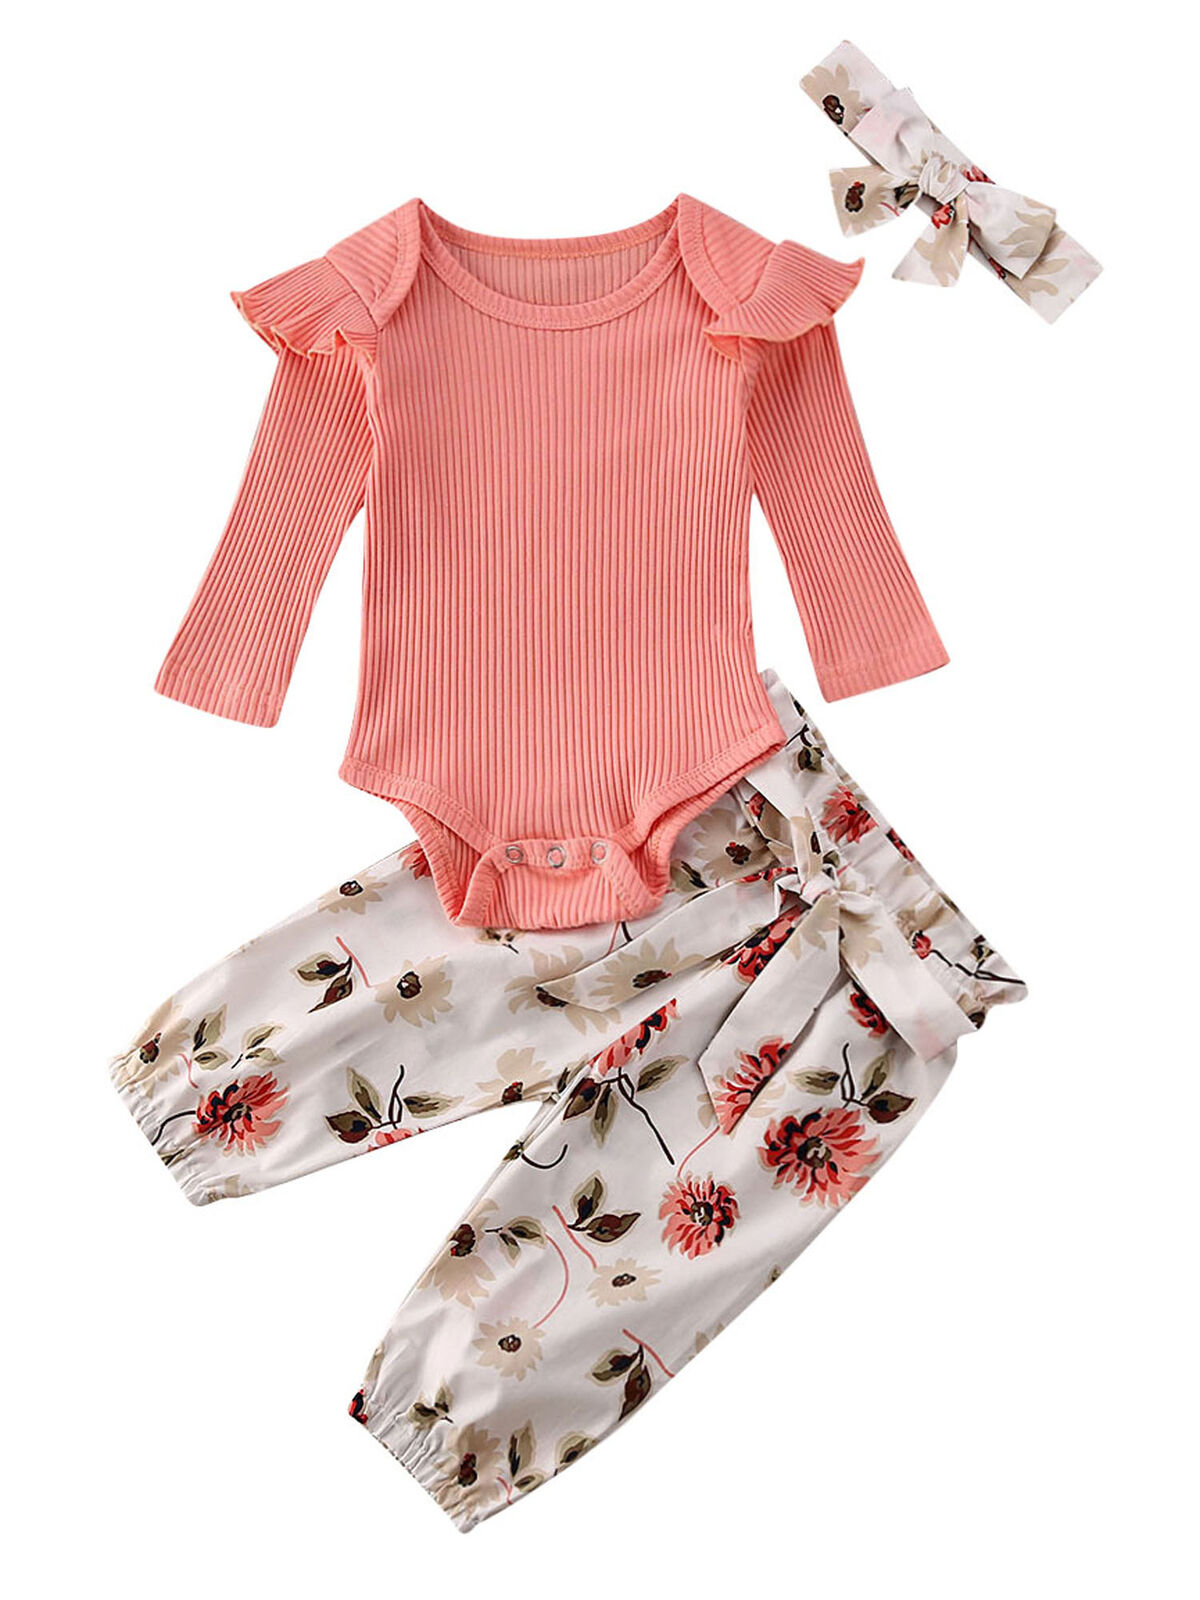 i-Auto Time Newborn Baby Girl Clothes Outfits Set Long Sleeve Ruffle Romper+Floral Bow Pants+Headband